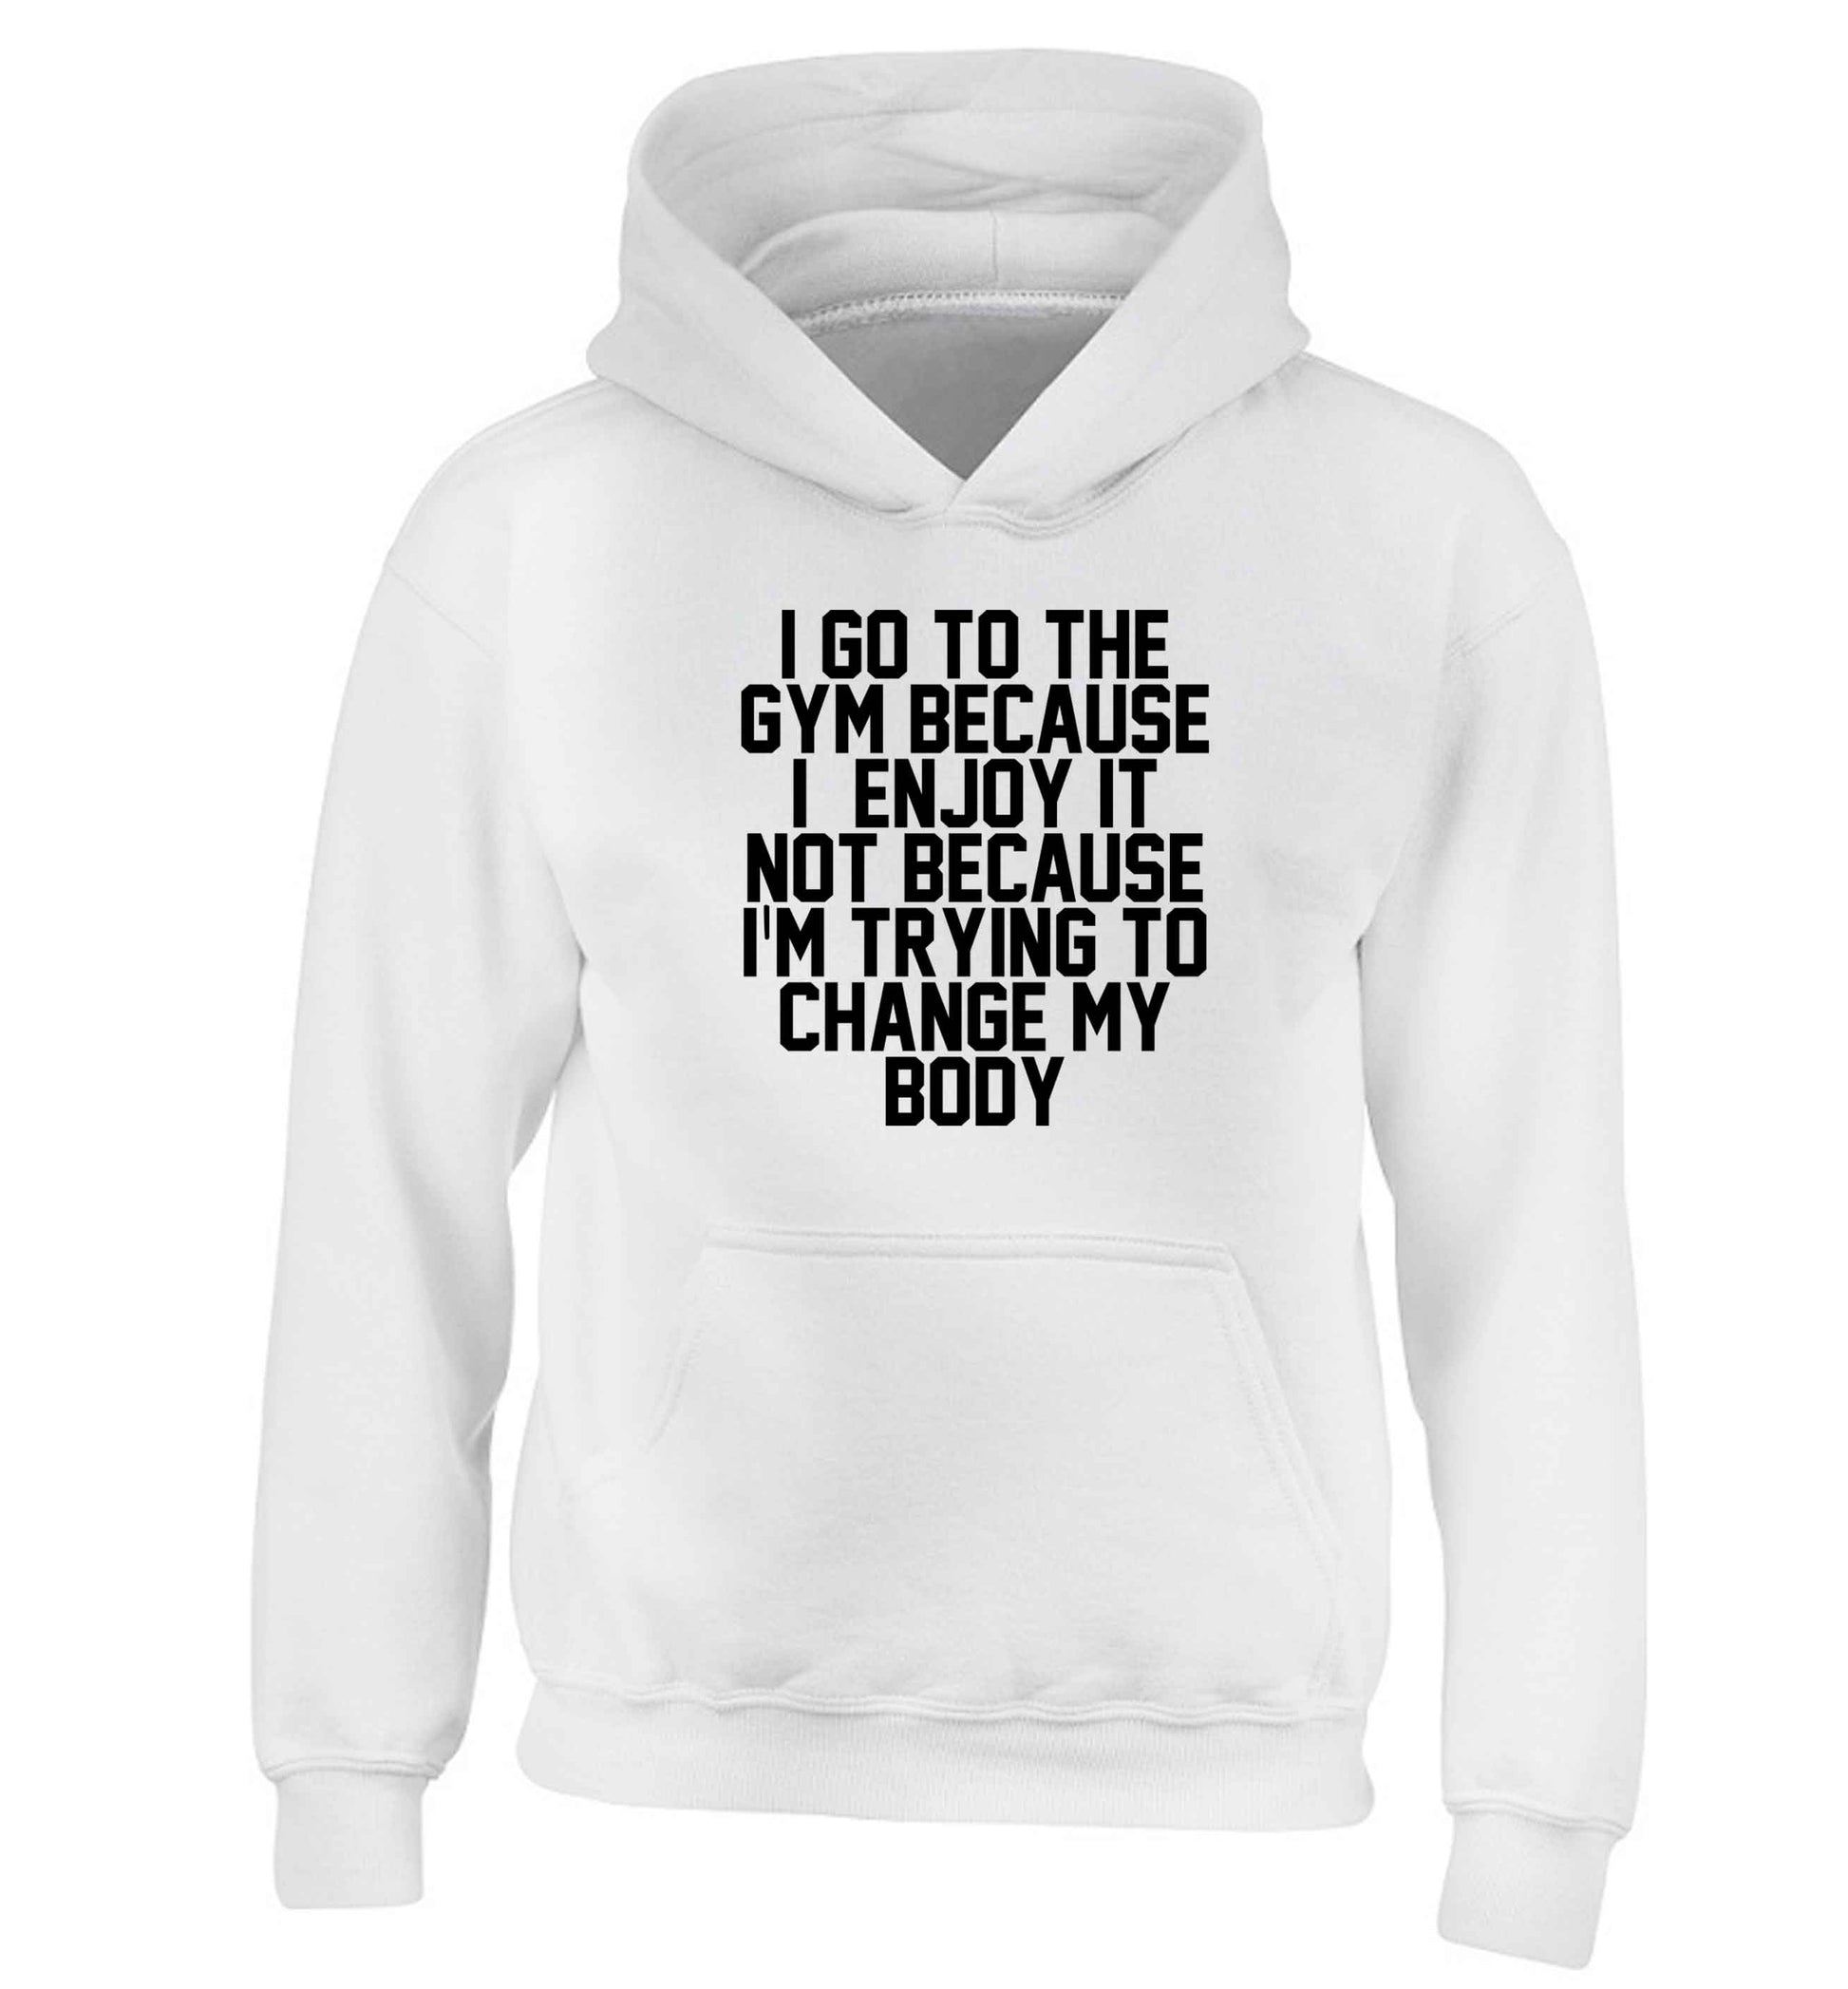 I go to the gym because I enjoy it not because I'm trying to change my body children's white hoodie 12-13 Years